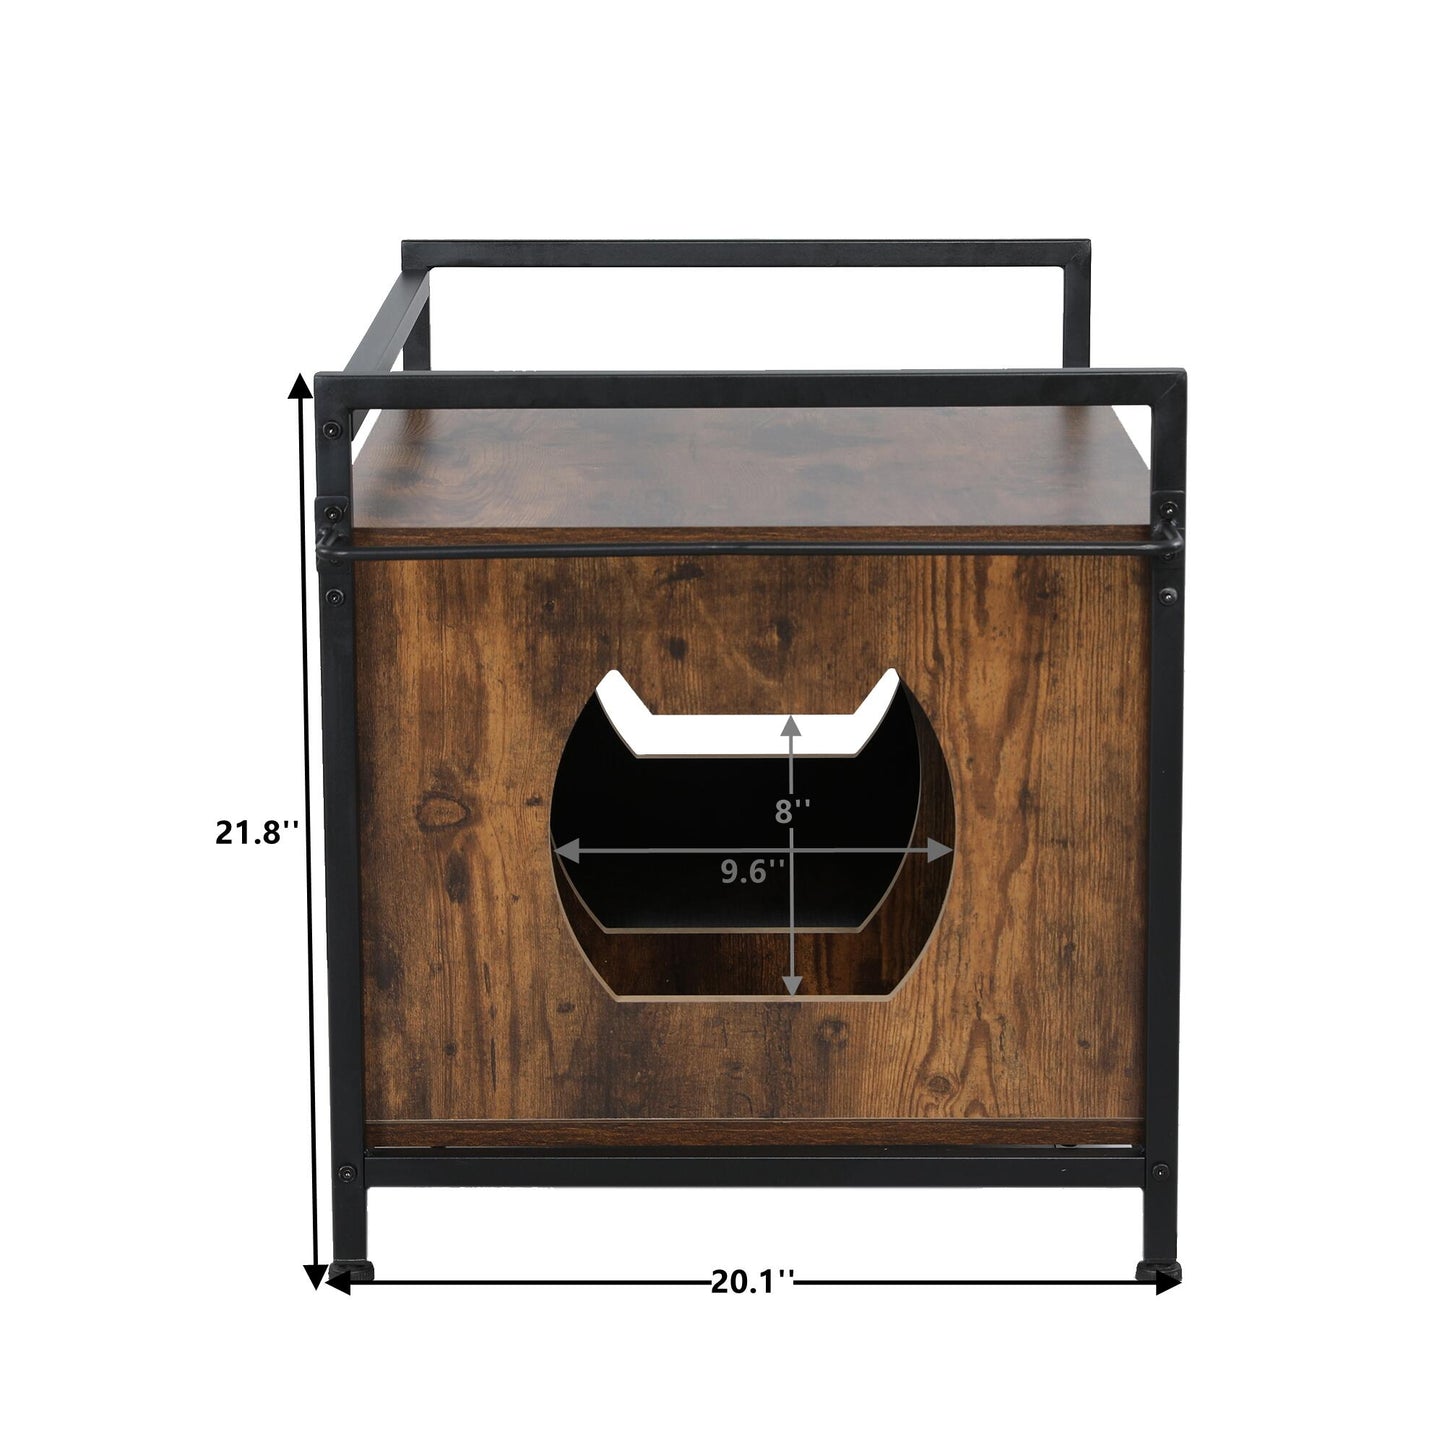 Cat Dog House Nightstand 30 inches Hidden  Litter Box, Pet Crate with Iron and Wood Sturdy Structure[US-Stock]